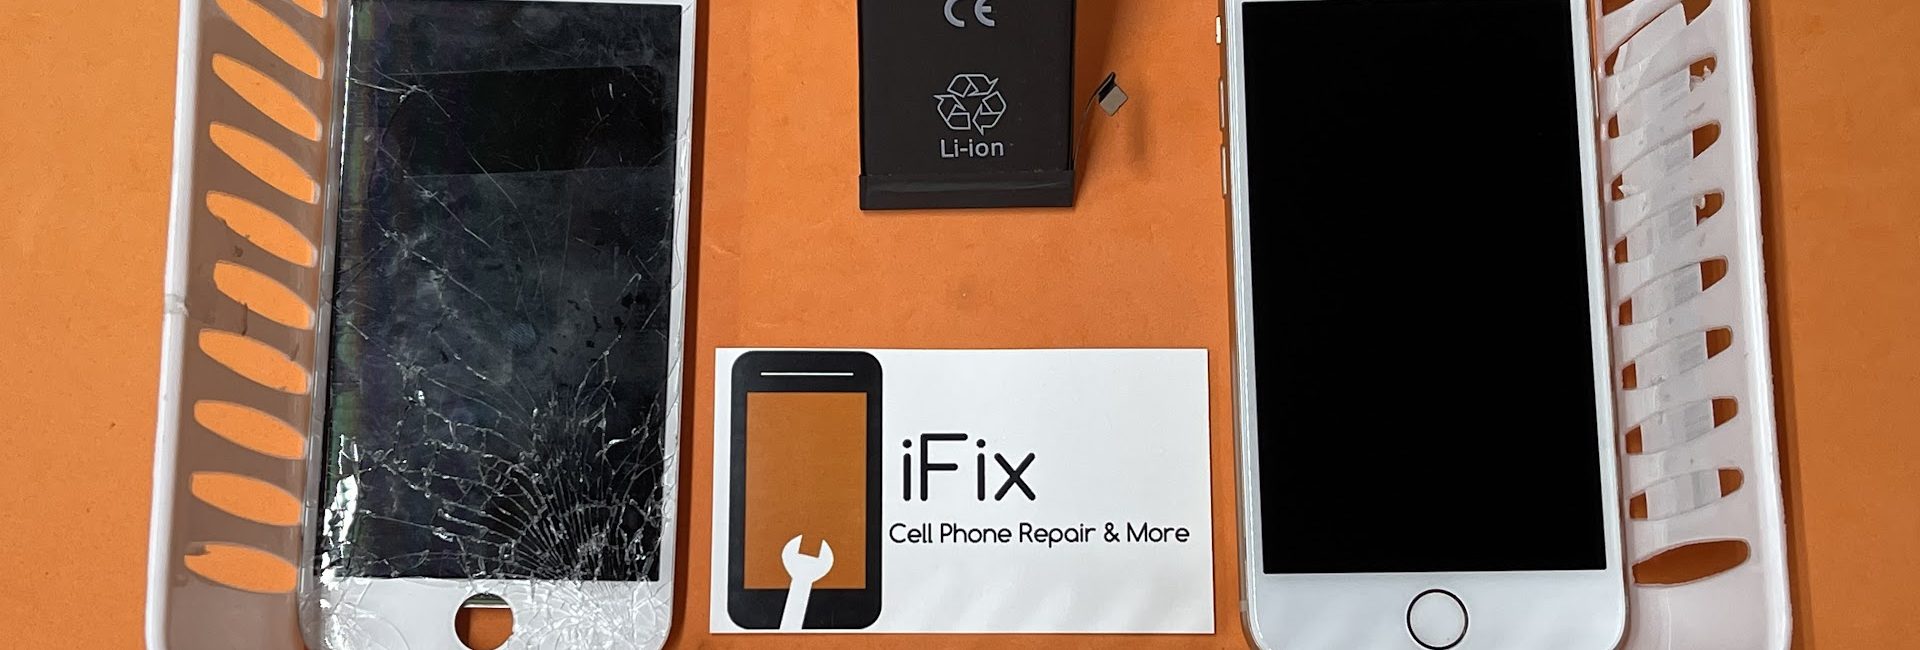 iFix – Cell Phone Computer & Tablet Repair 4